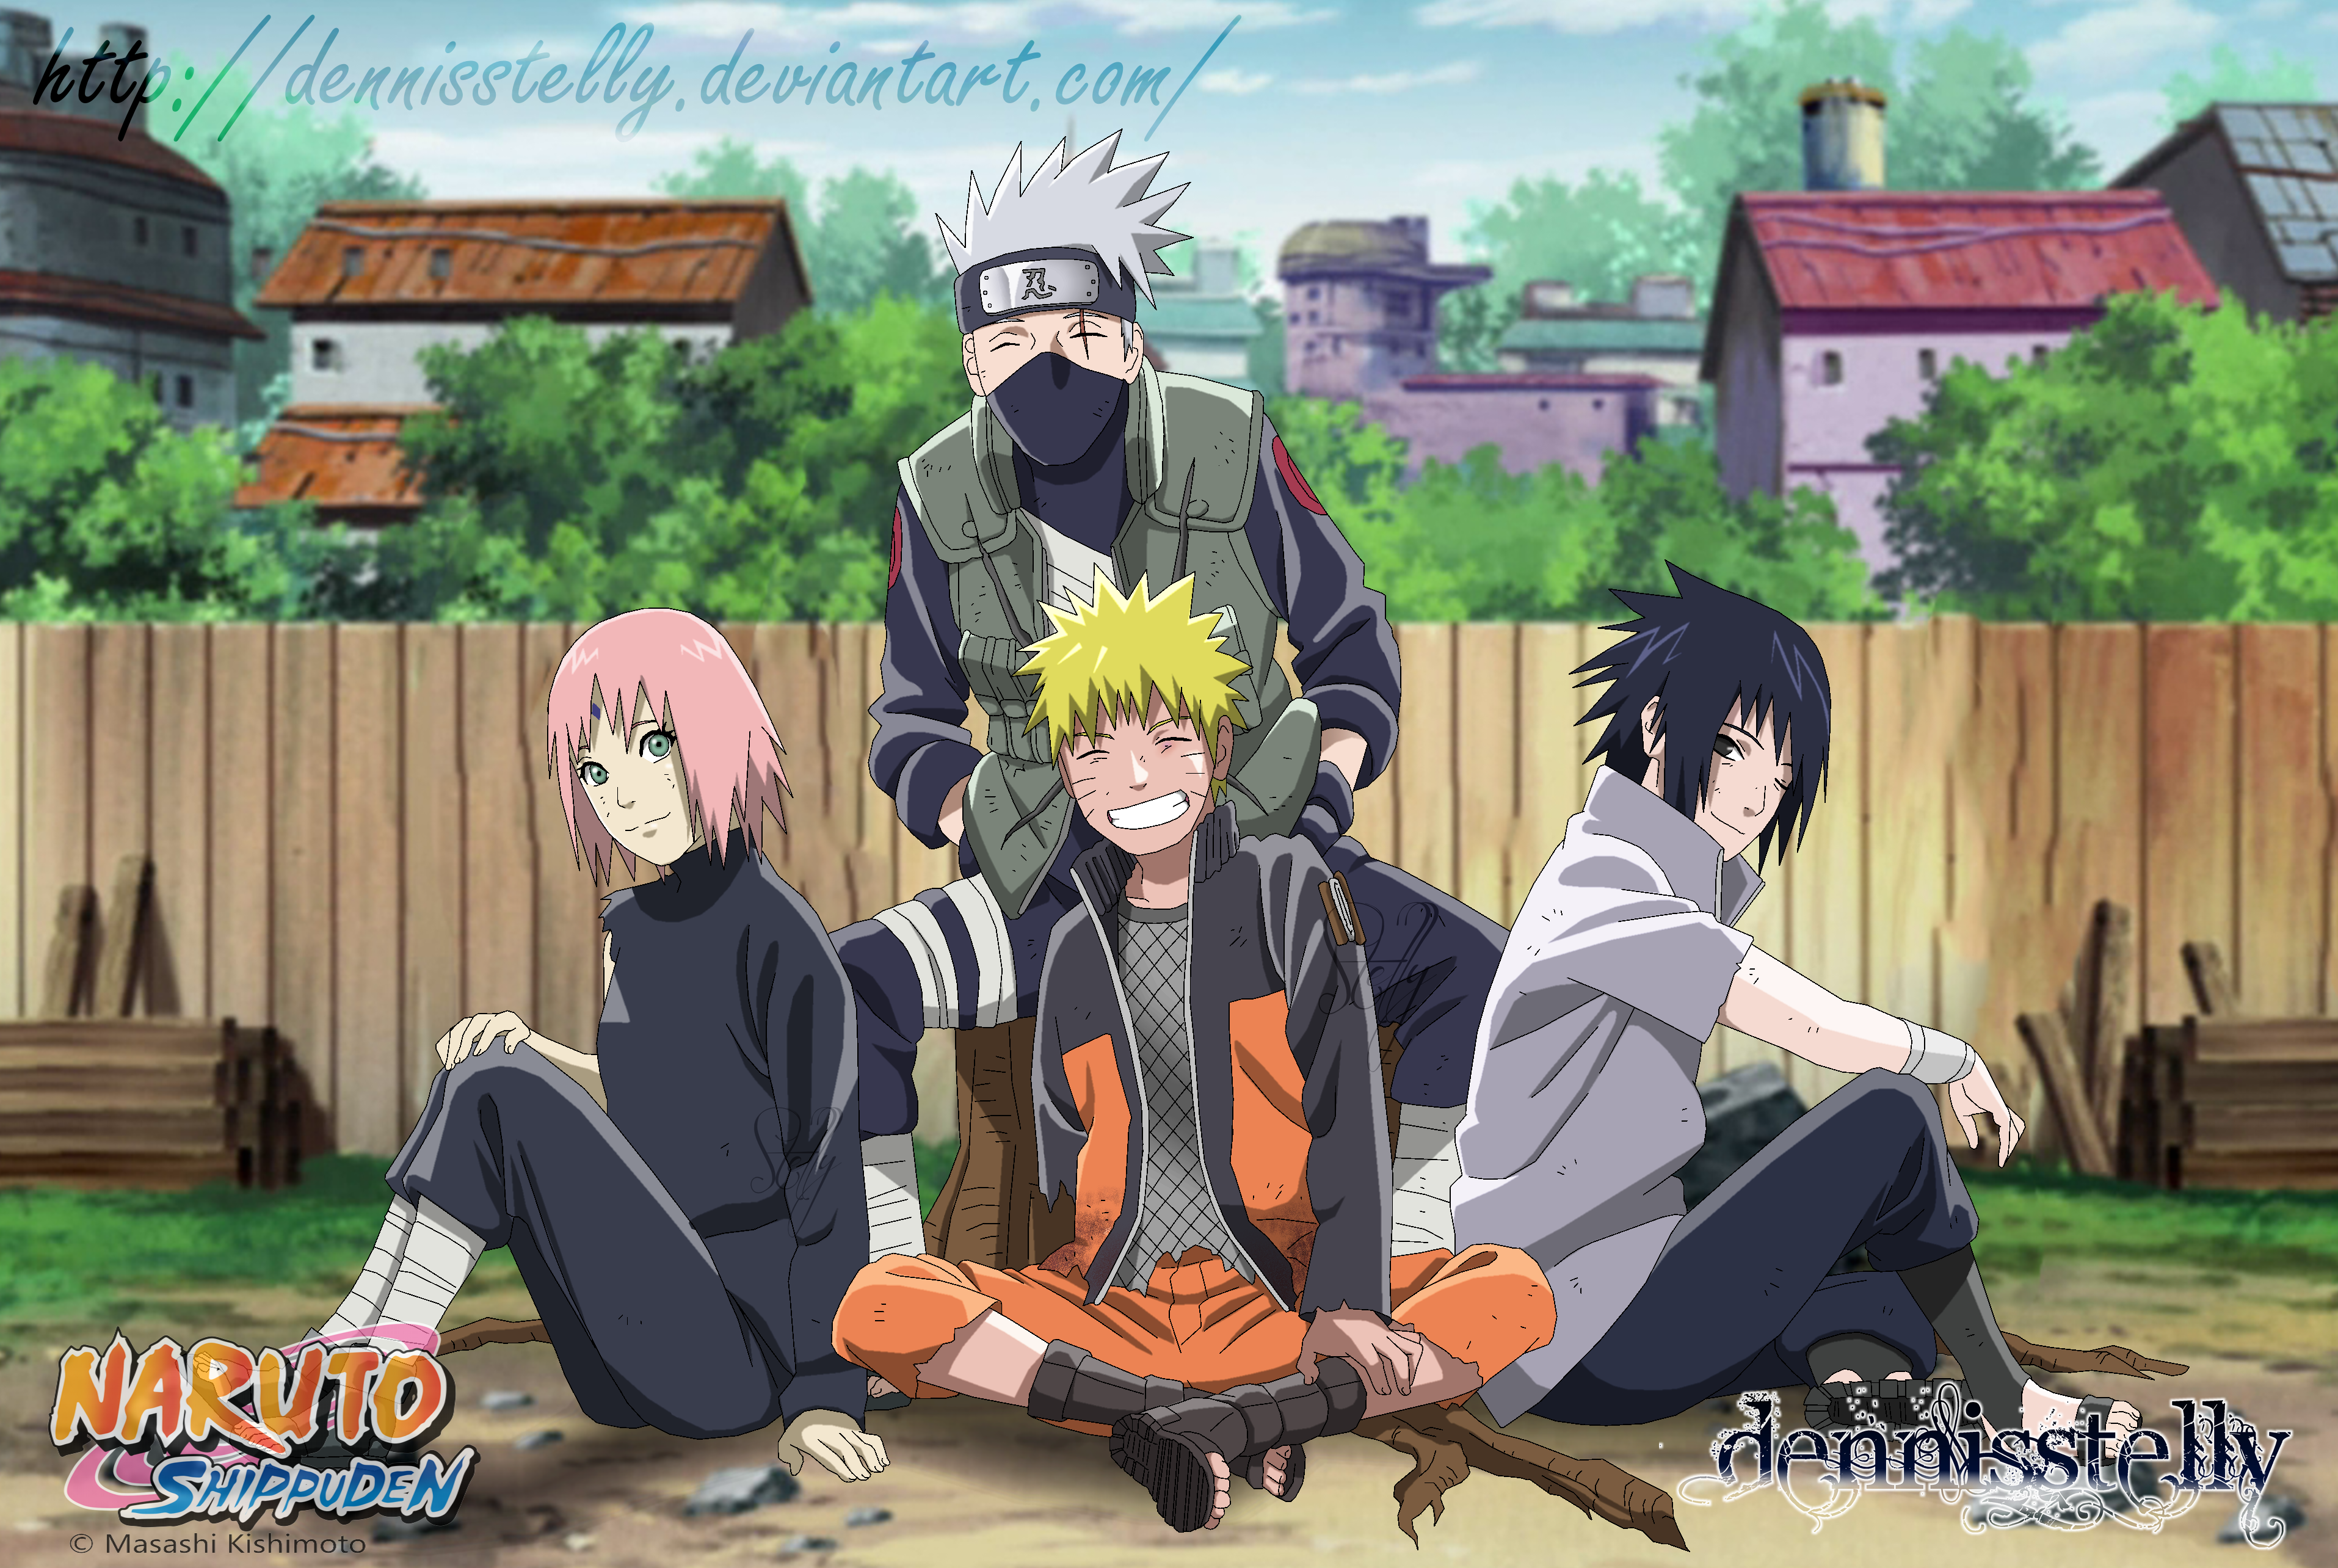 Anime Naruto HD Wallpaper by DennisStelly